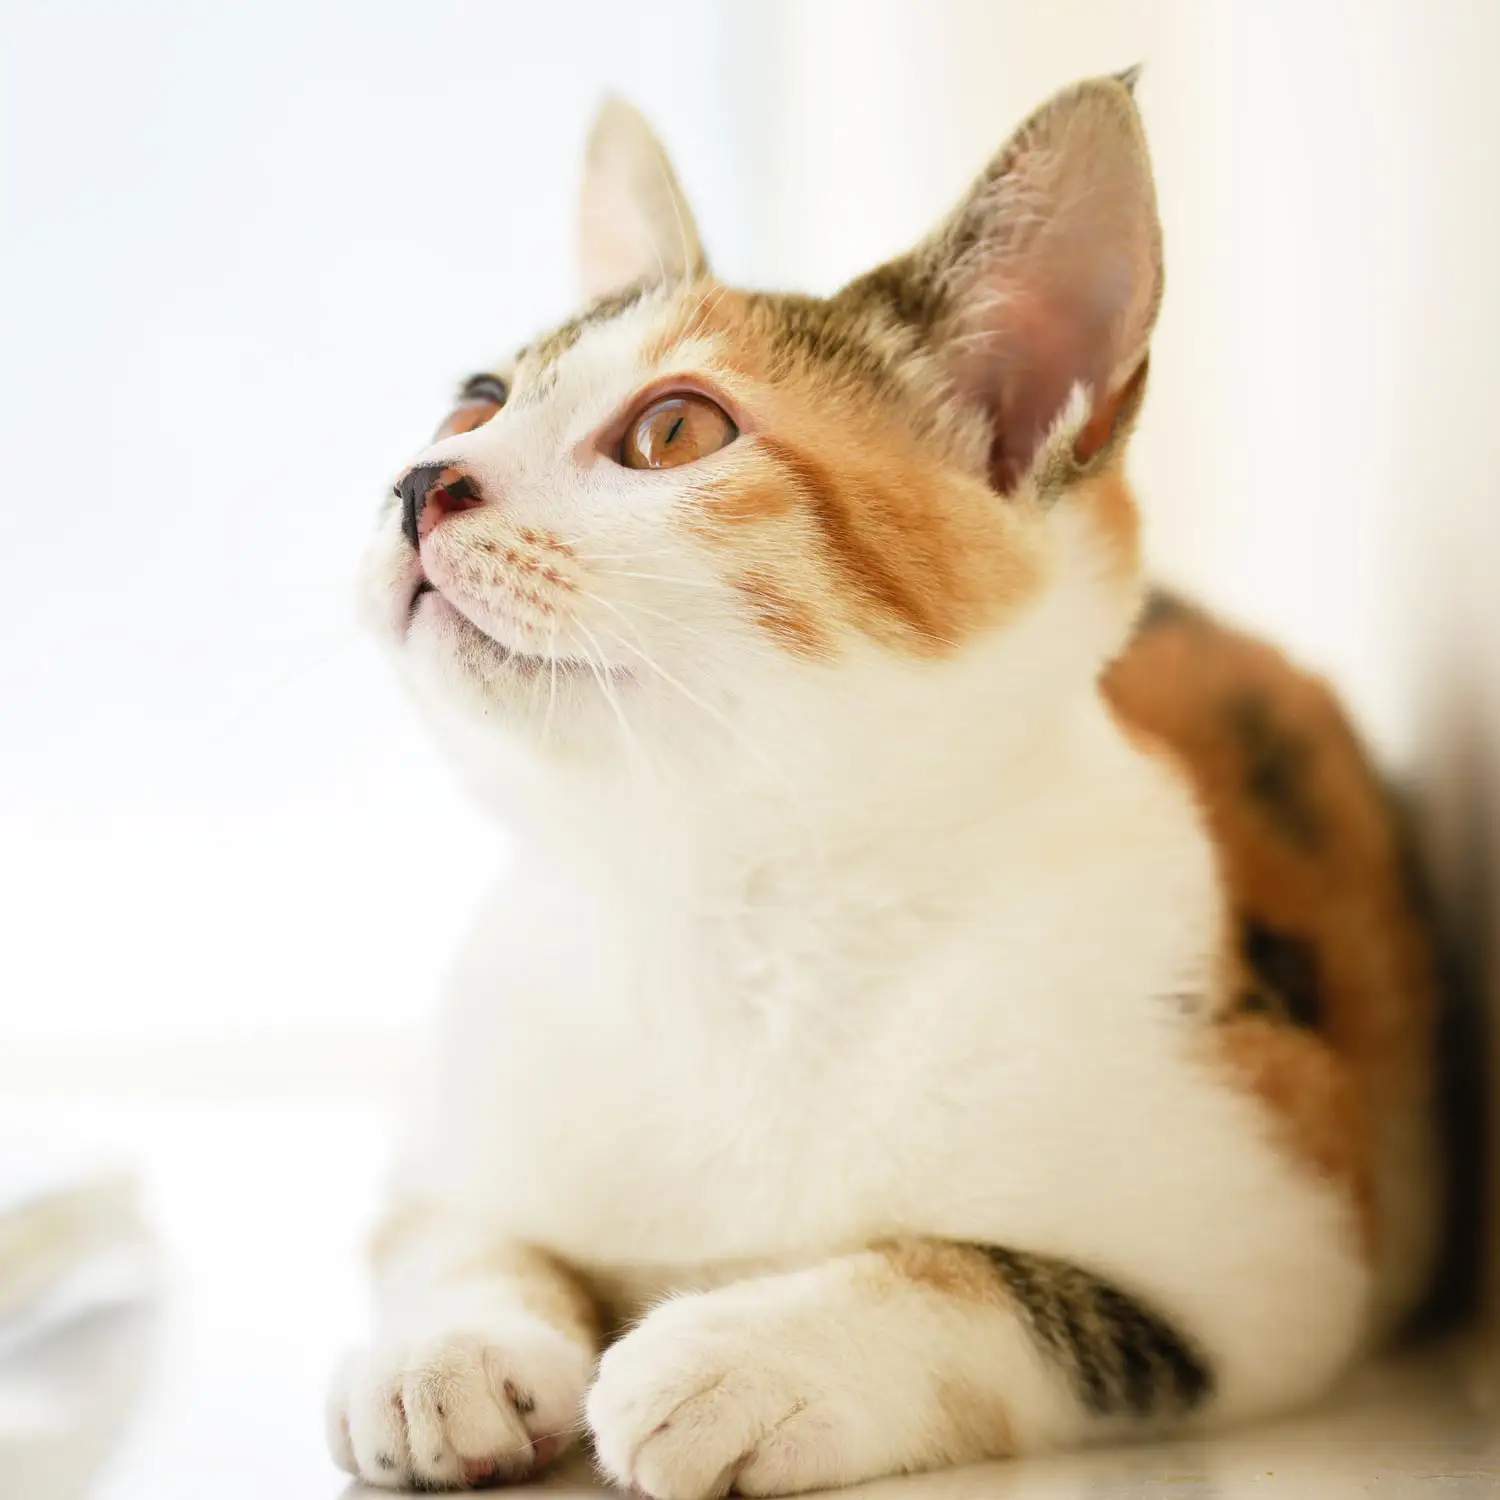 A calico cat in a white room looks upwards